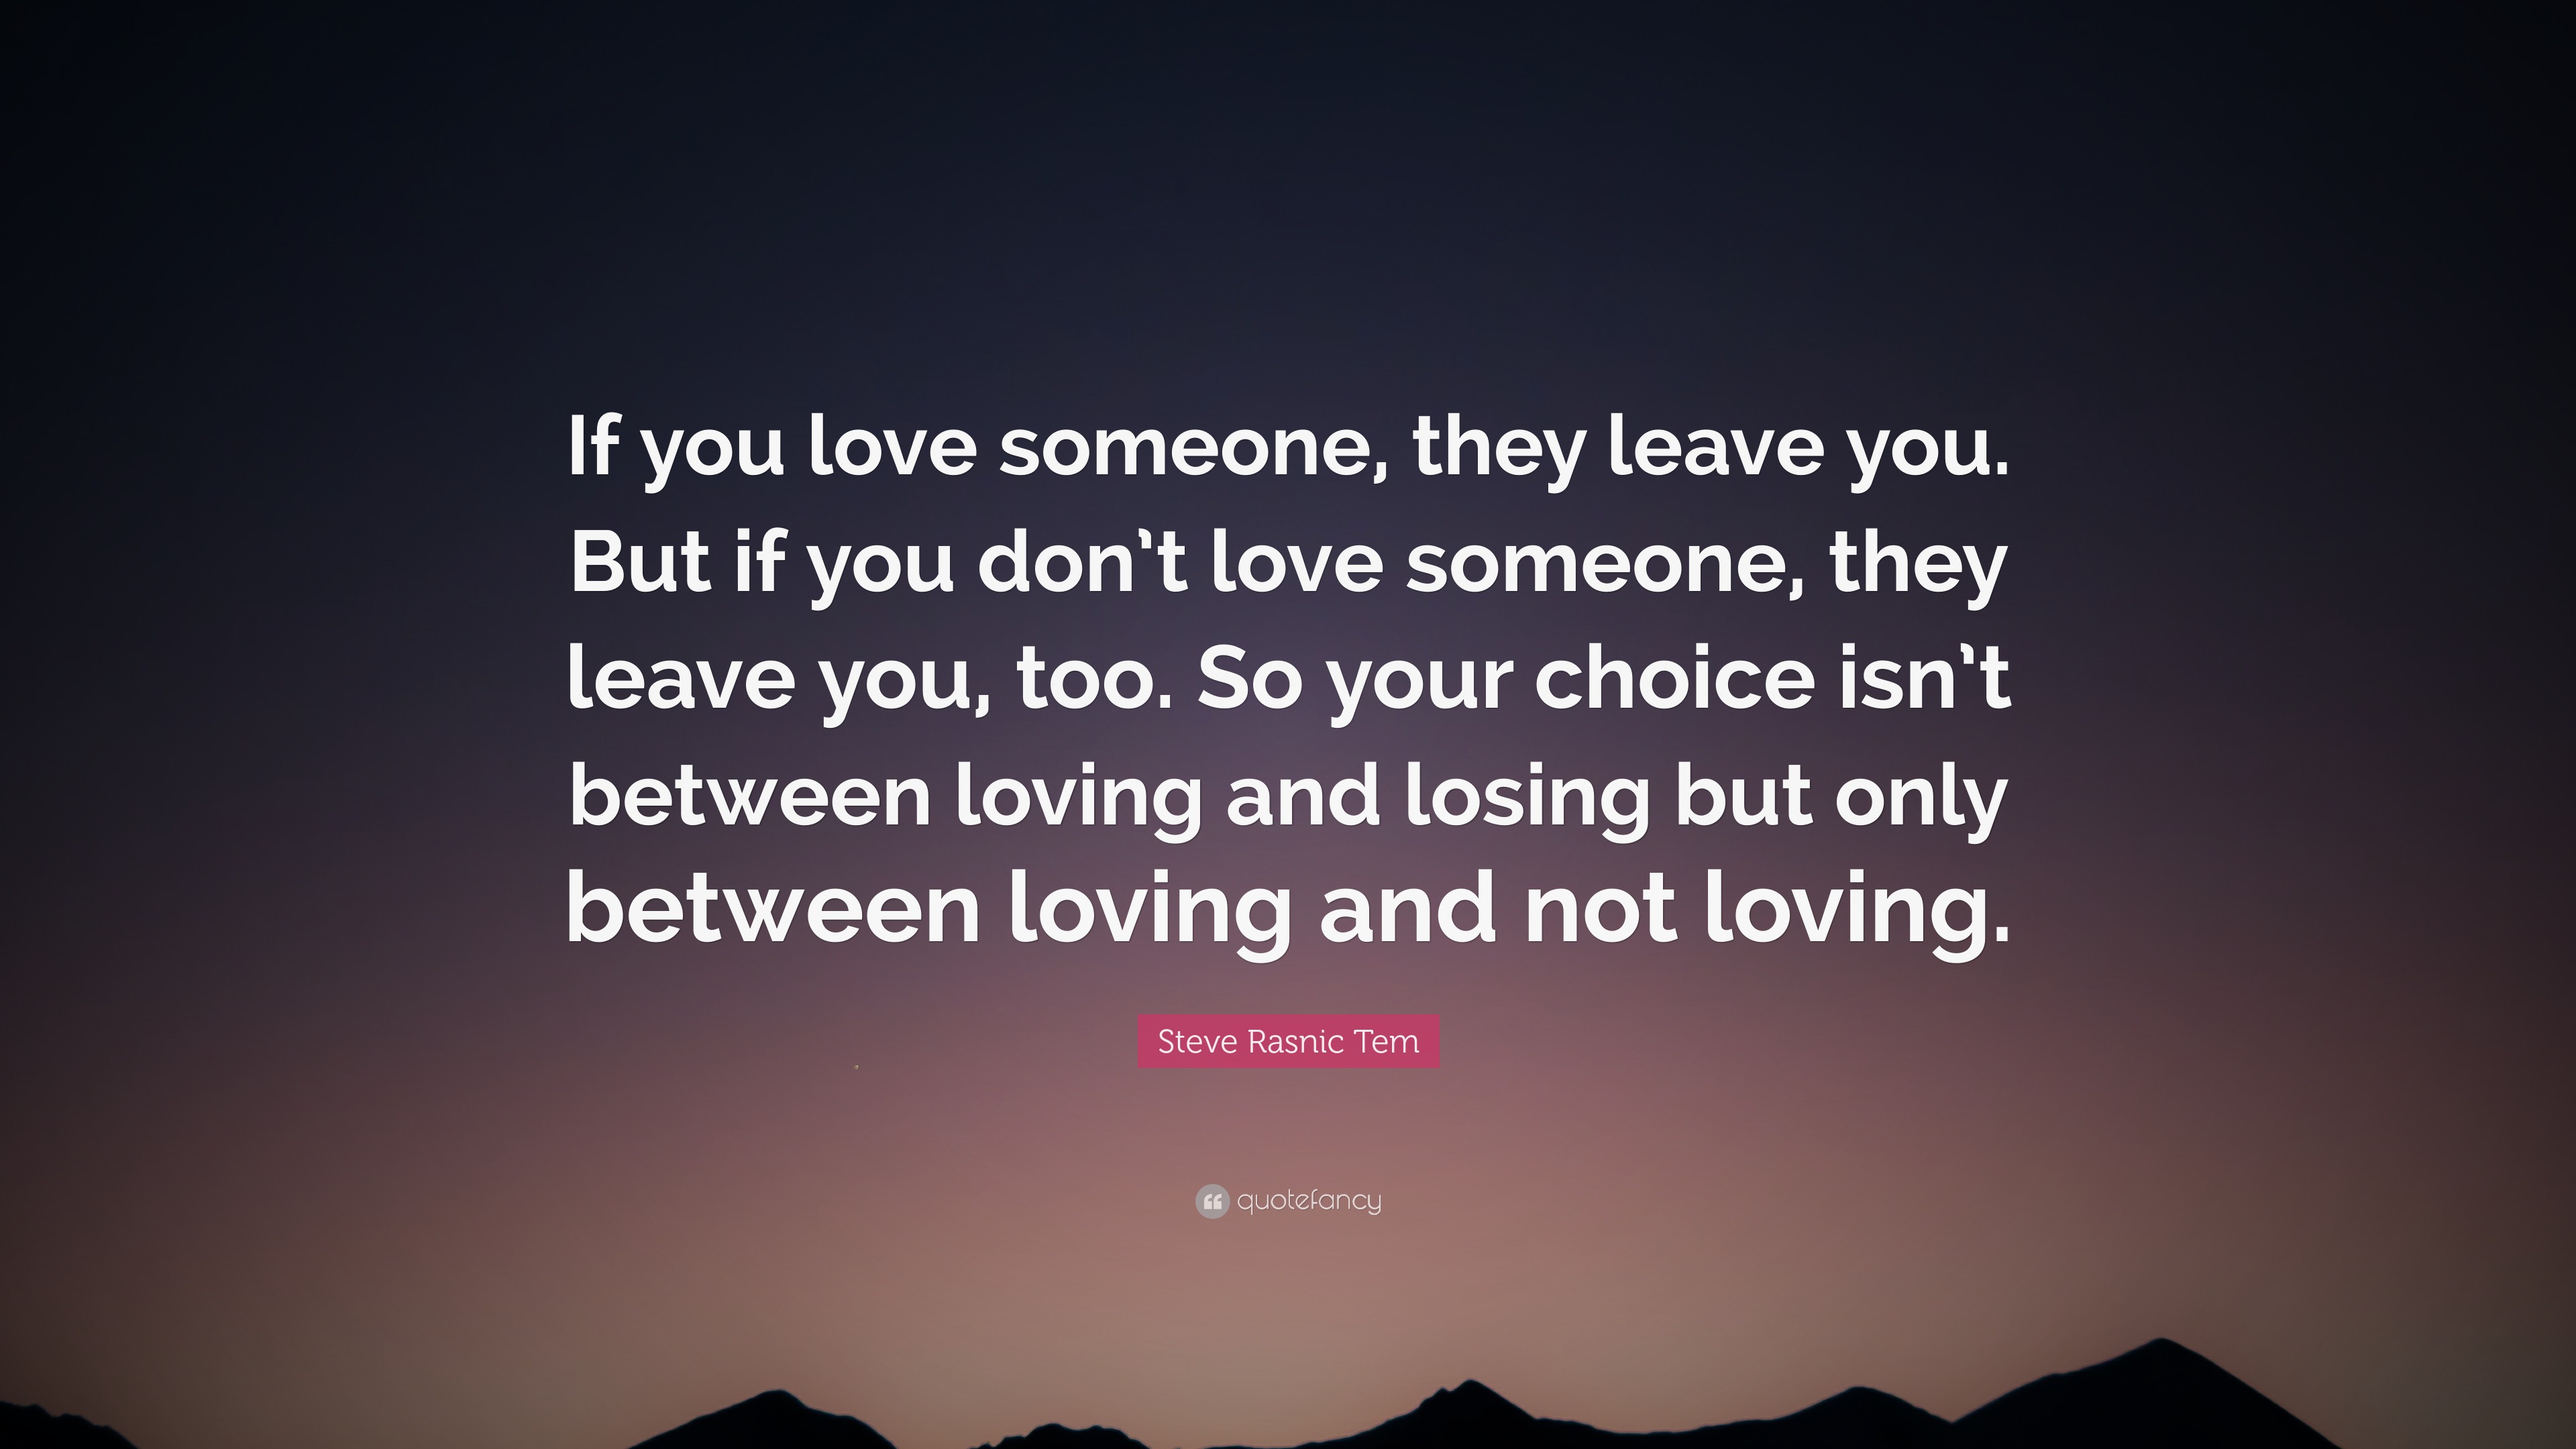 Steve Rasnic Tem Quote “If you love someone they leave you But